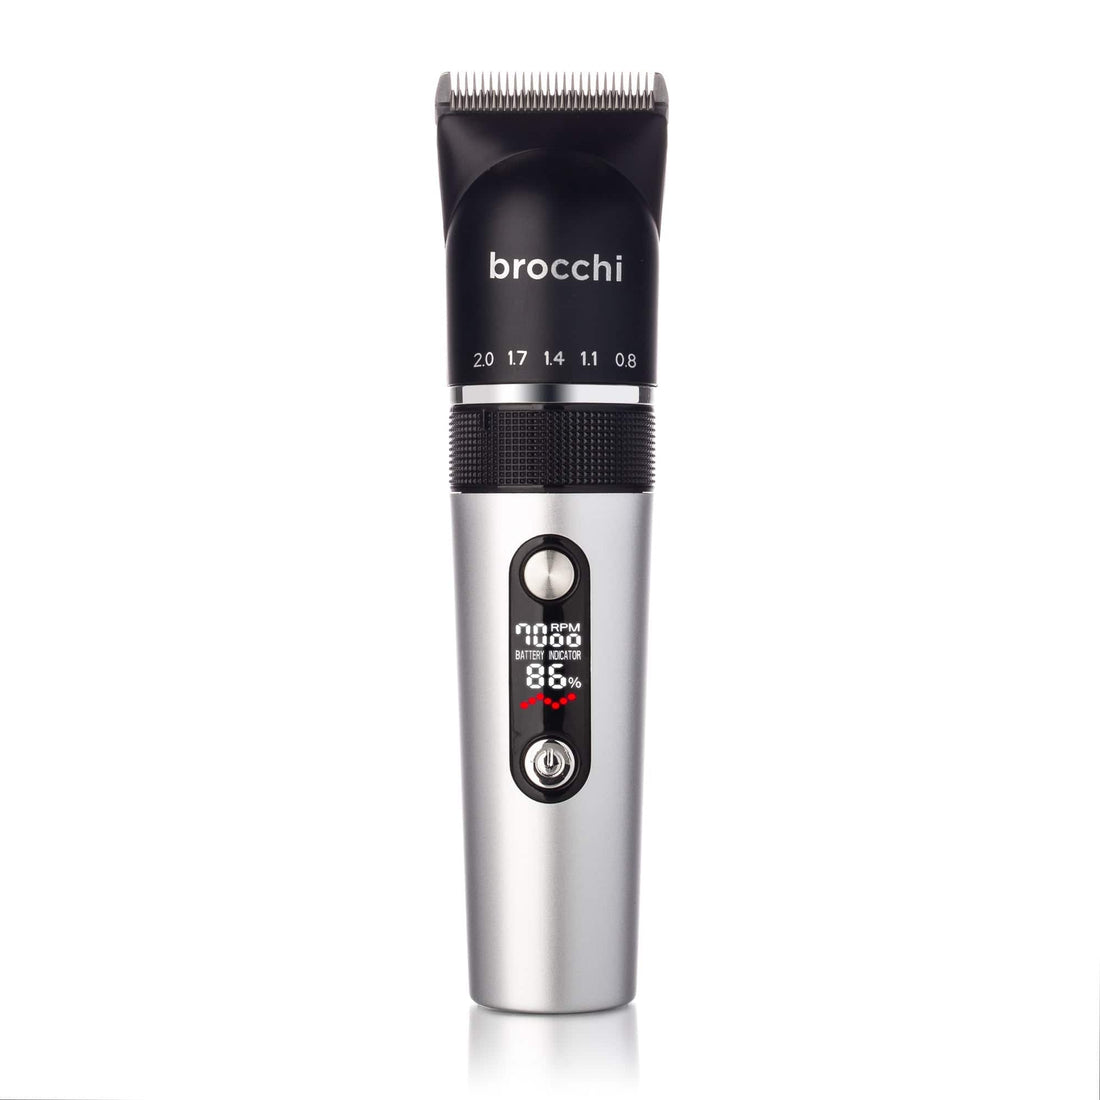 Brocchi Clipper Pro - Digital Face and Body Hair Trimmer